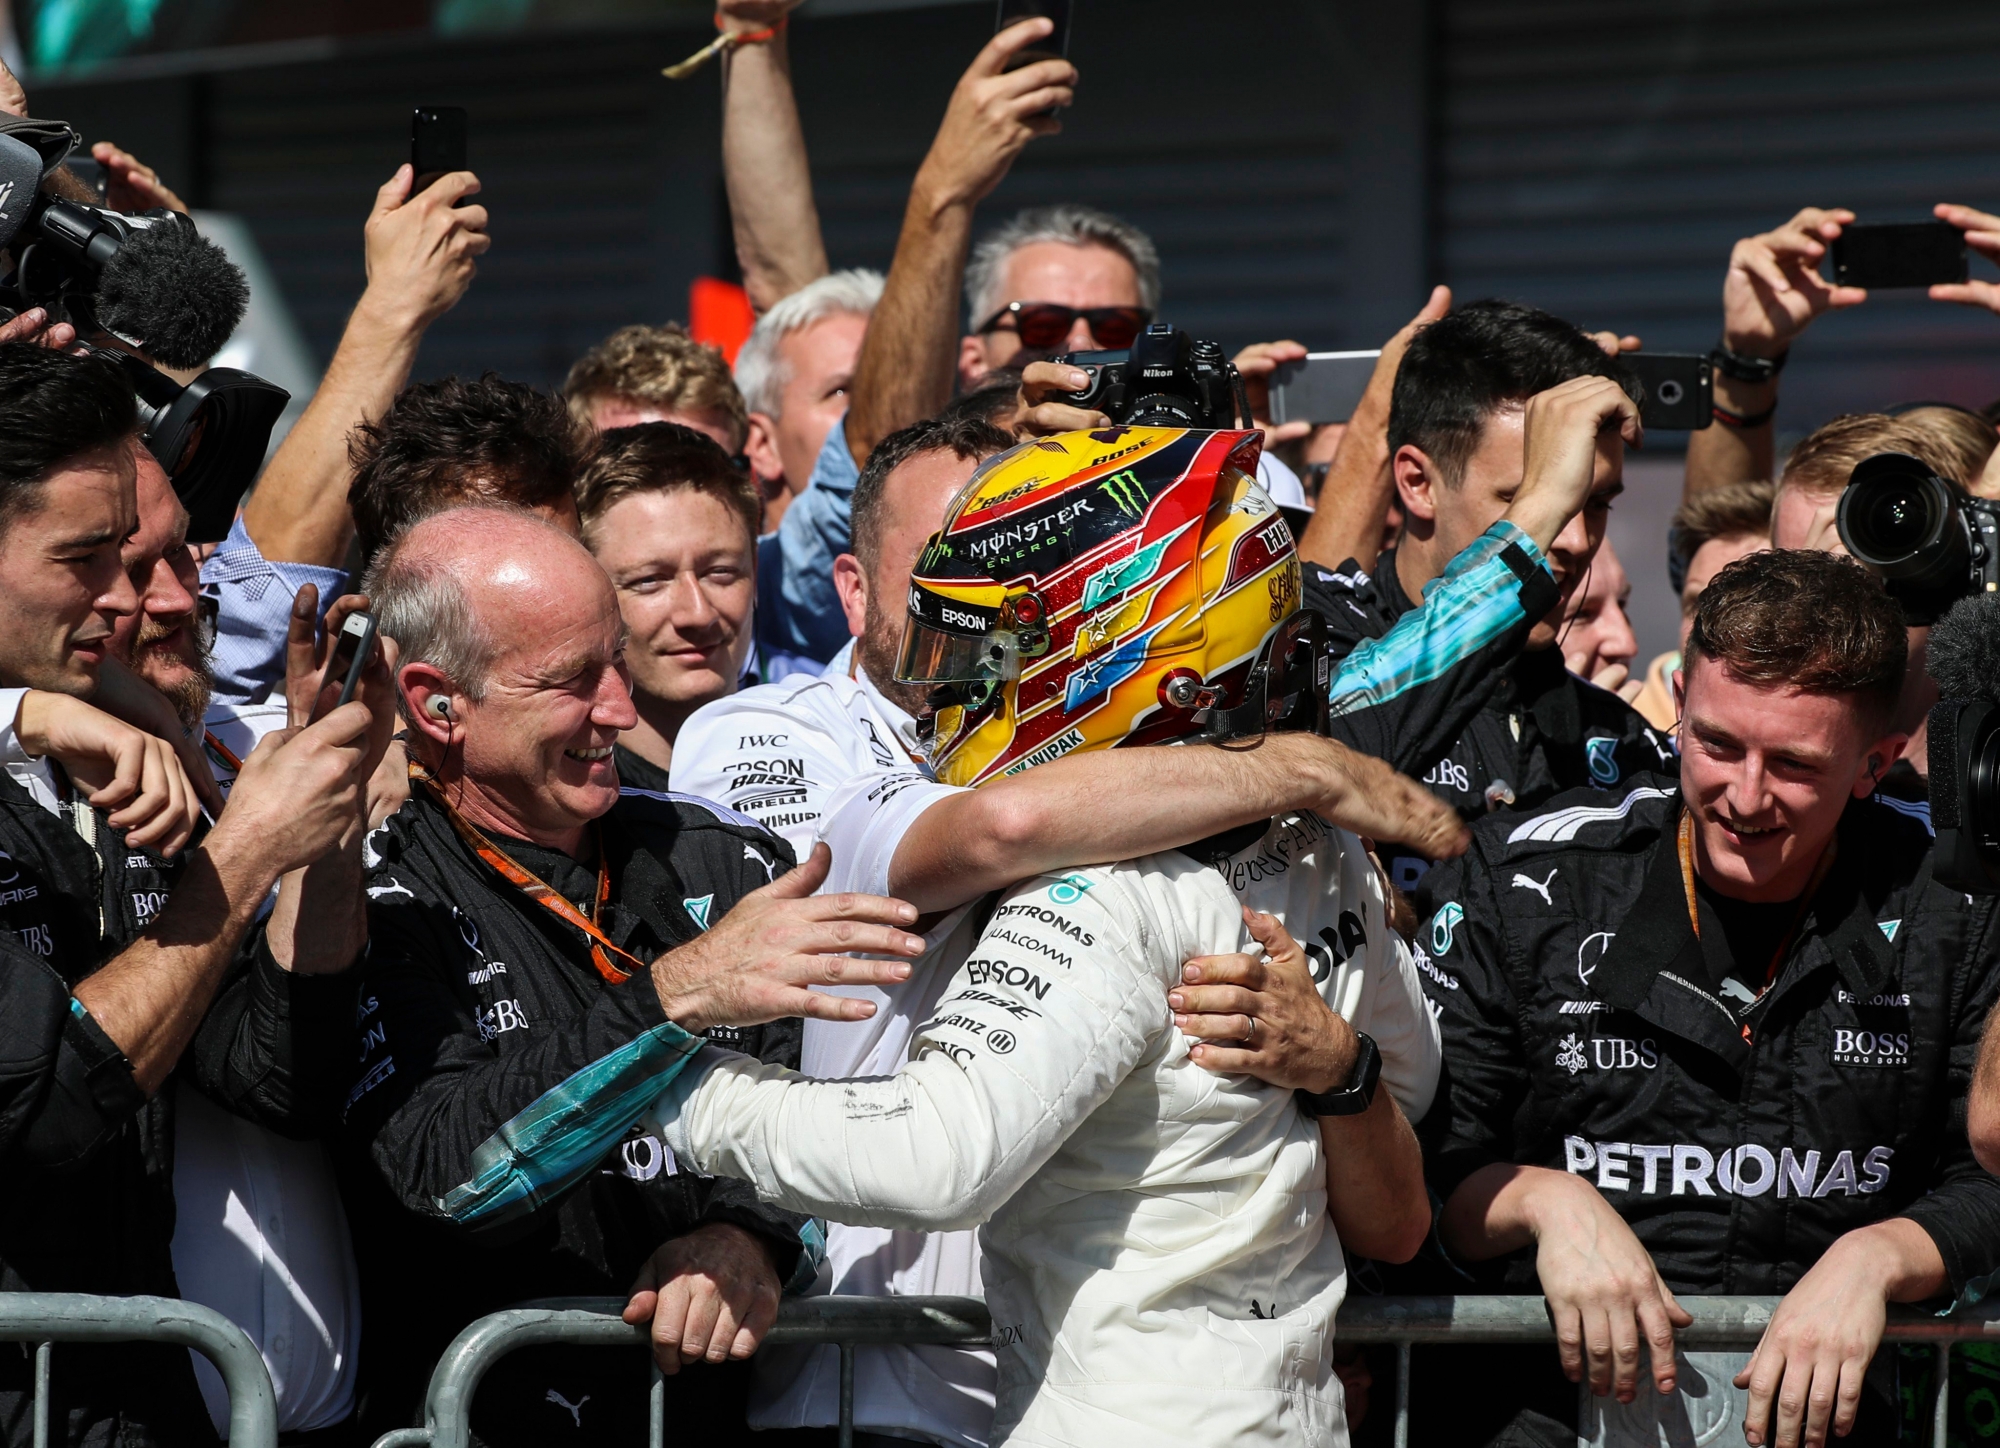 epa06181001 British Formula One driver Lewis Hamilton of Mercedes AMG GP celebrates with his team after winning the 2017 Formula One Grand Prix of Italy at the Formula One circuit in Monza, Italy, 03 September 2017.  EPA/SRDJAN SUKI ITALY FORMULA ONE GRAND PRIX